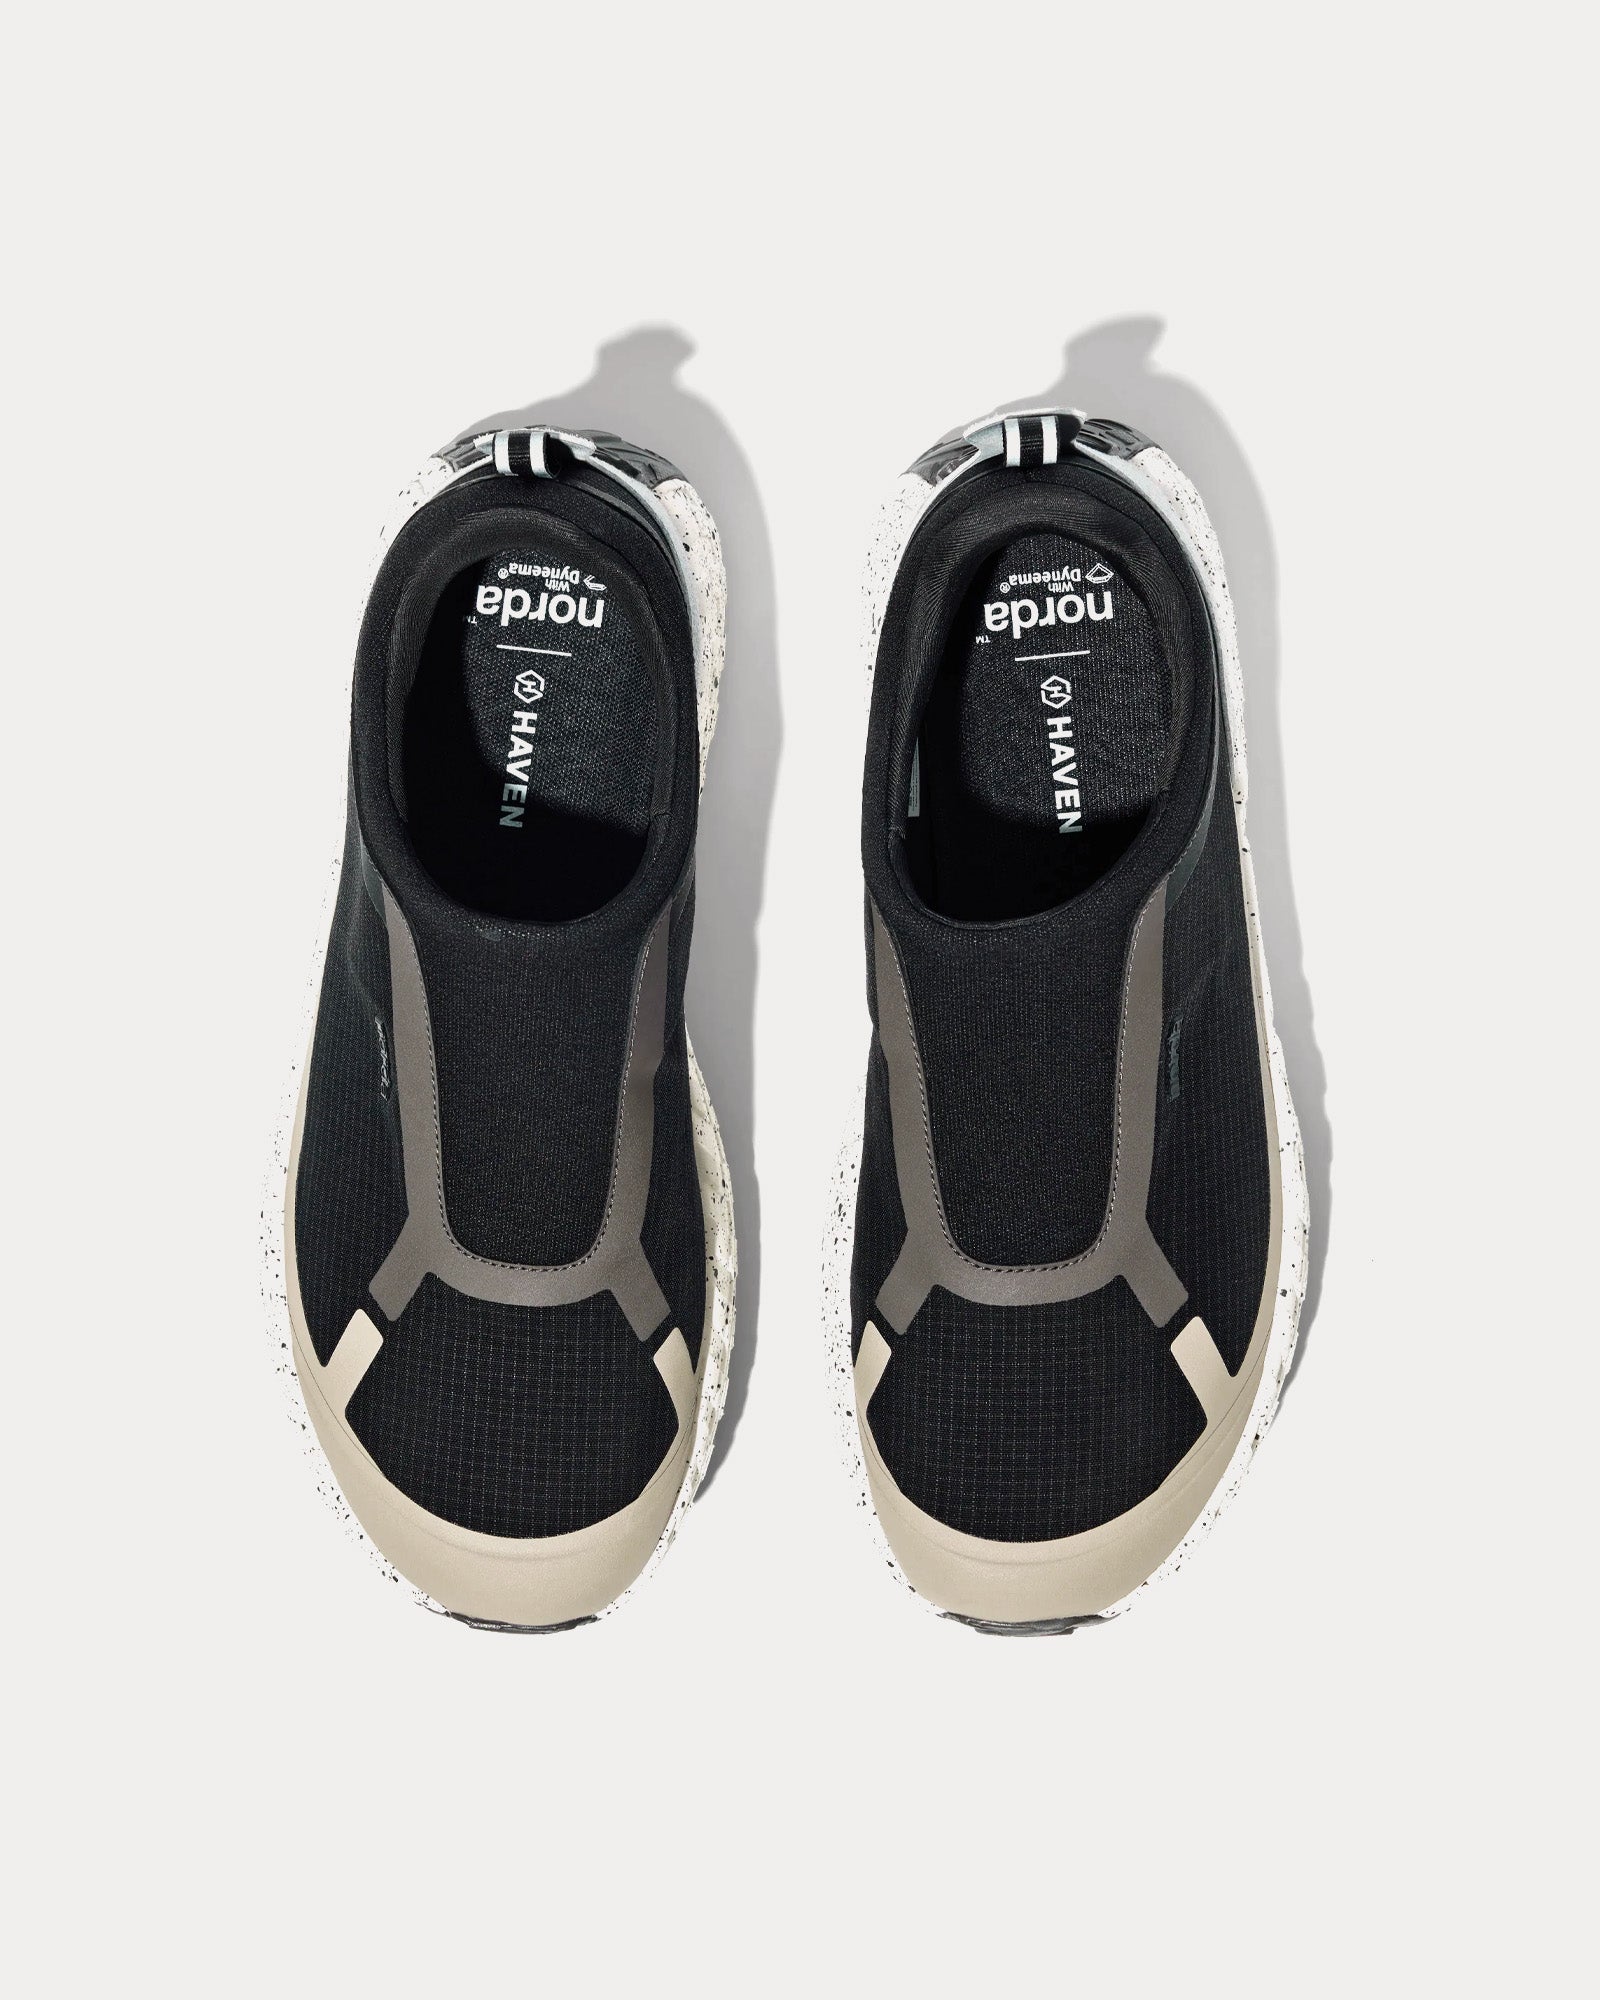 Norda x Haven - 003 M Quarry Running Shoes